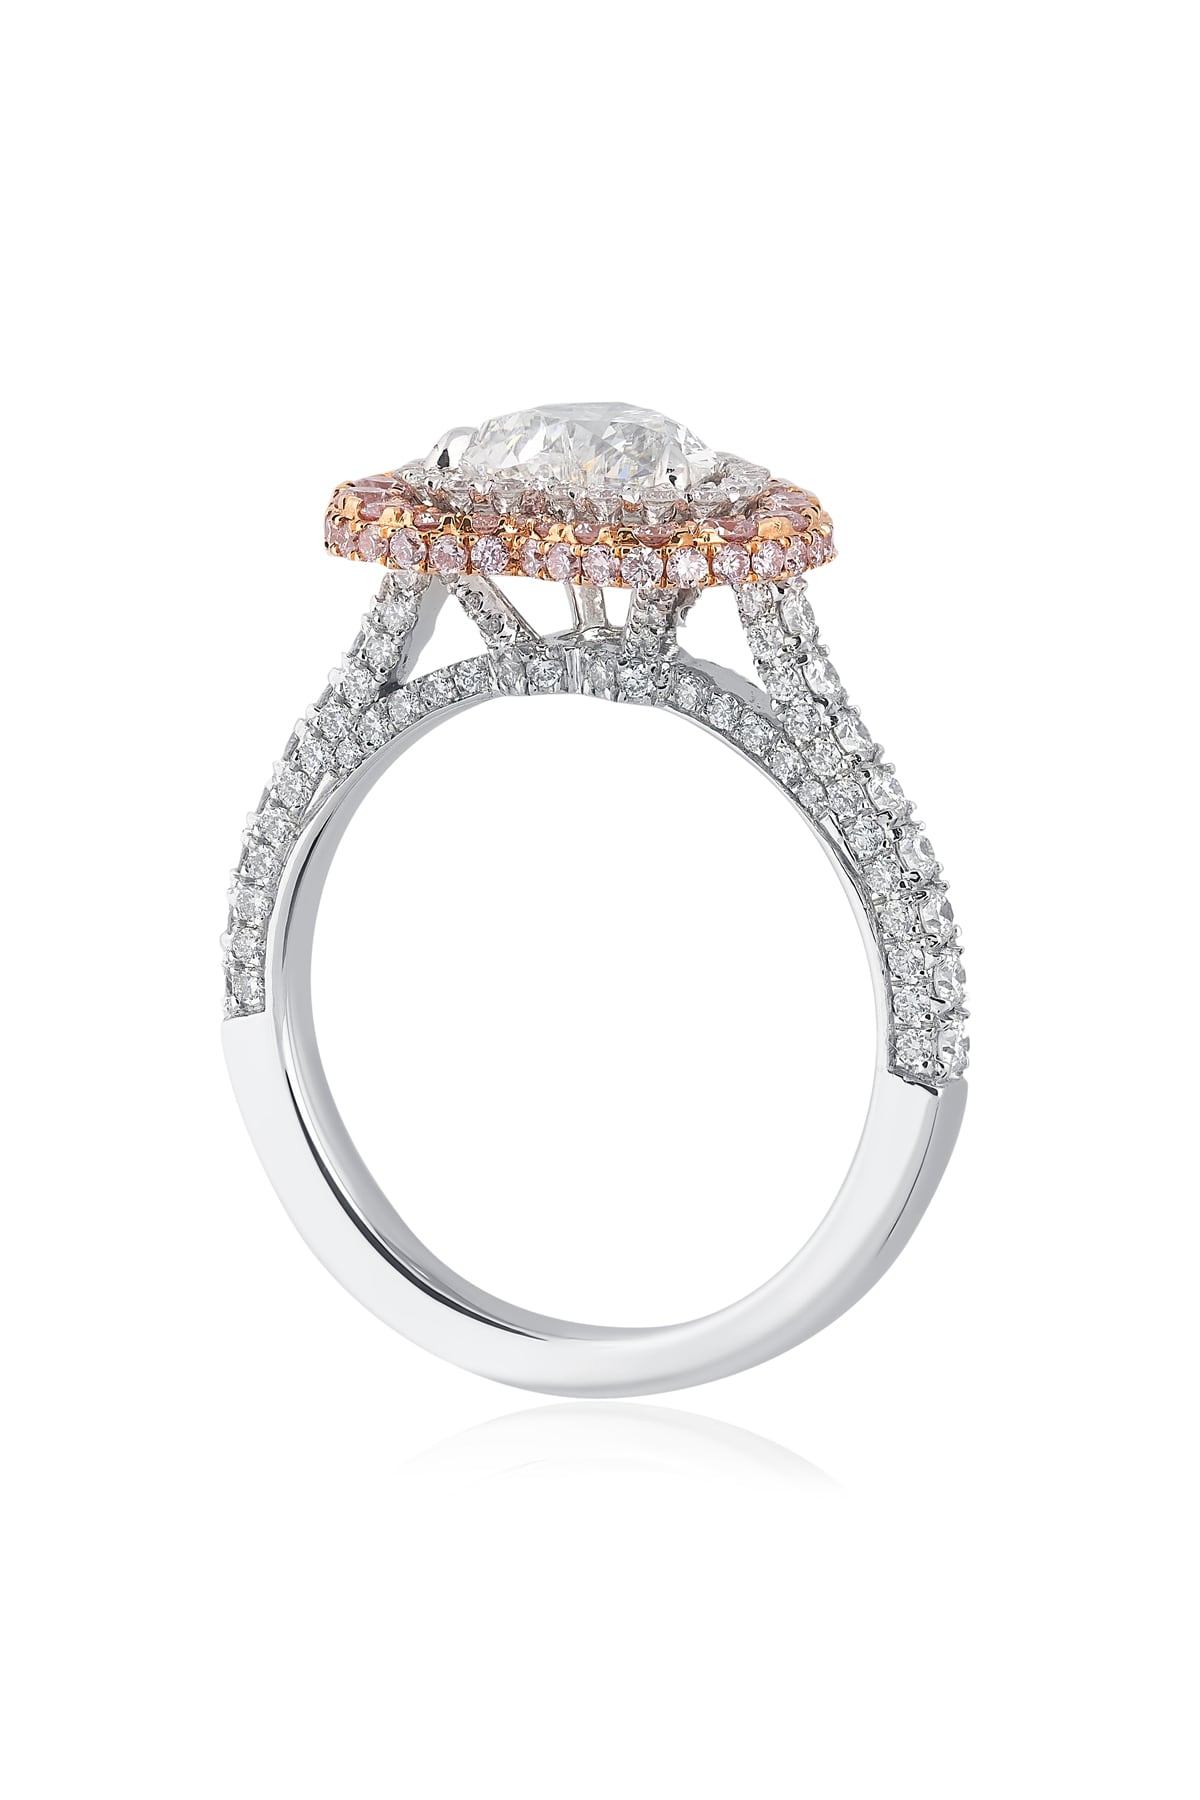 Heart Shaped Diamond Halo Ring With White And Pink Diamonds from LeGassick.